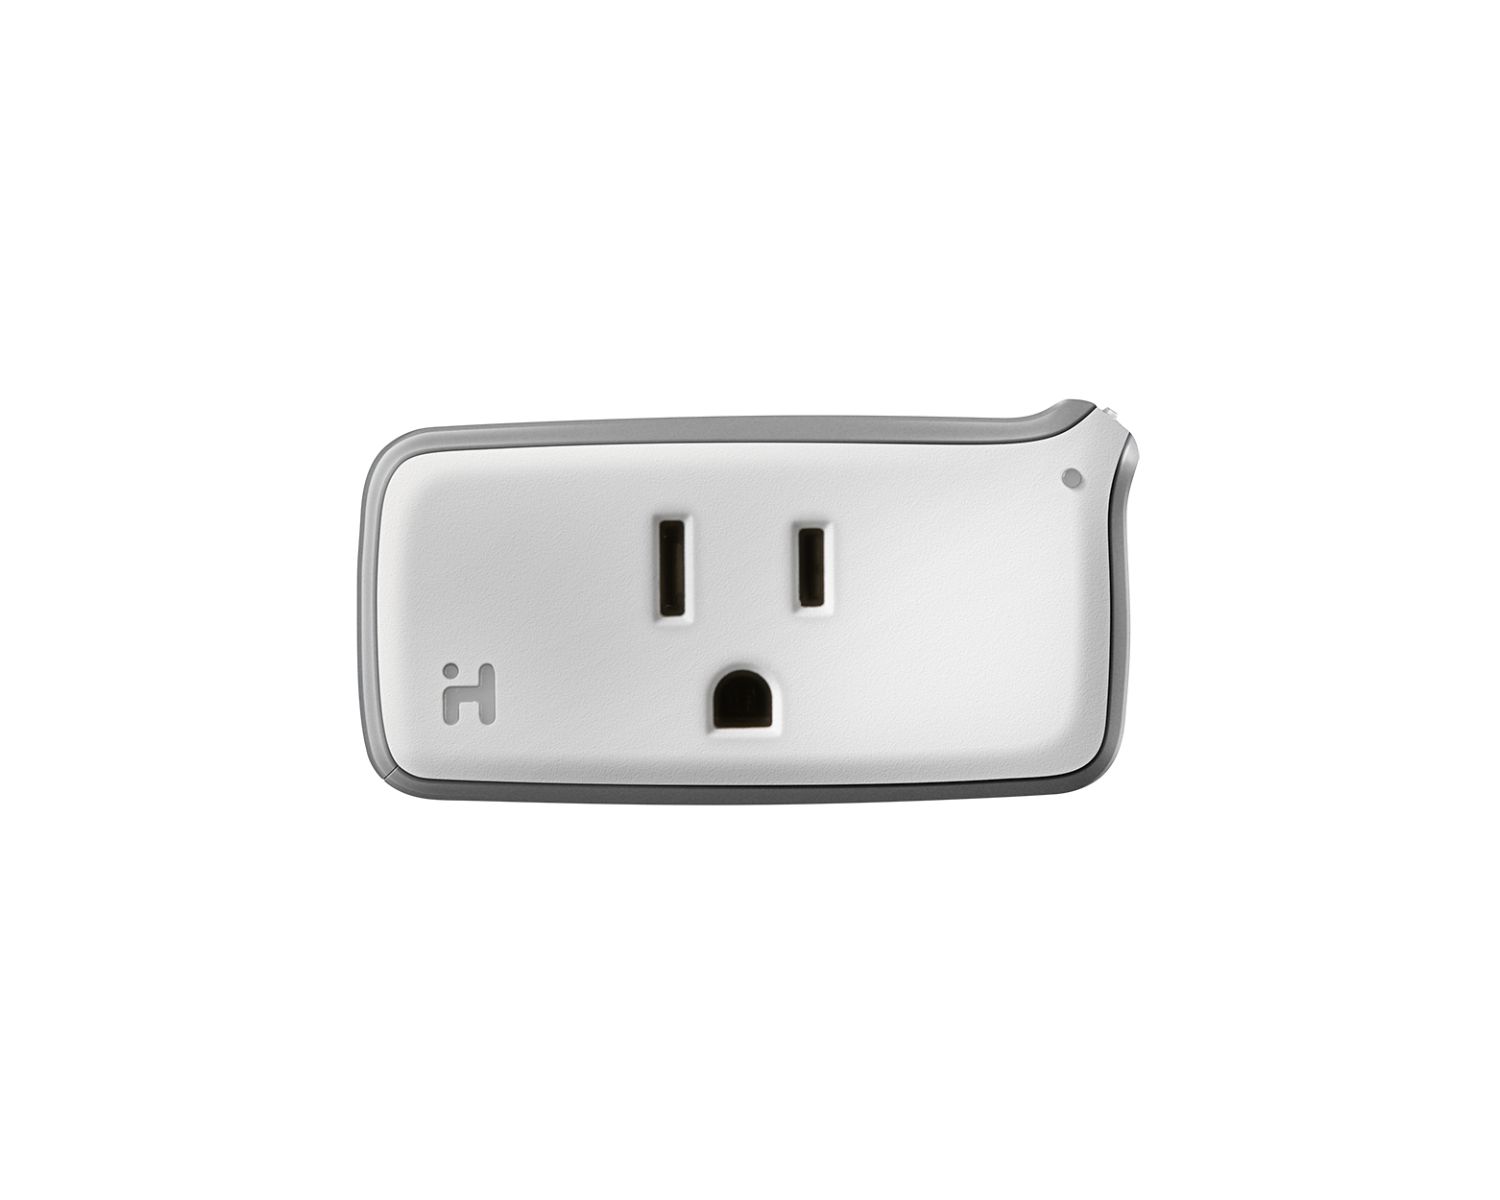 Govee Smart Plug 15A Review, by Ethan Turner, Dec, 2023